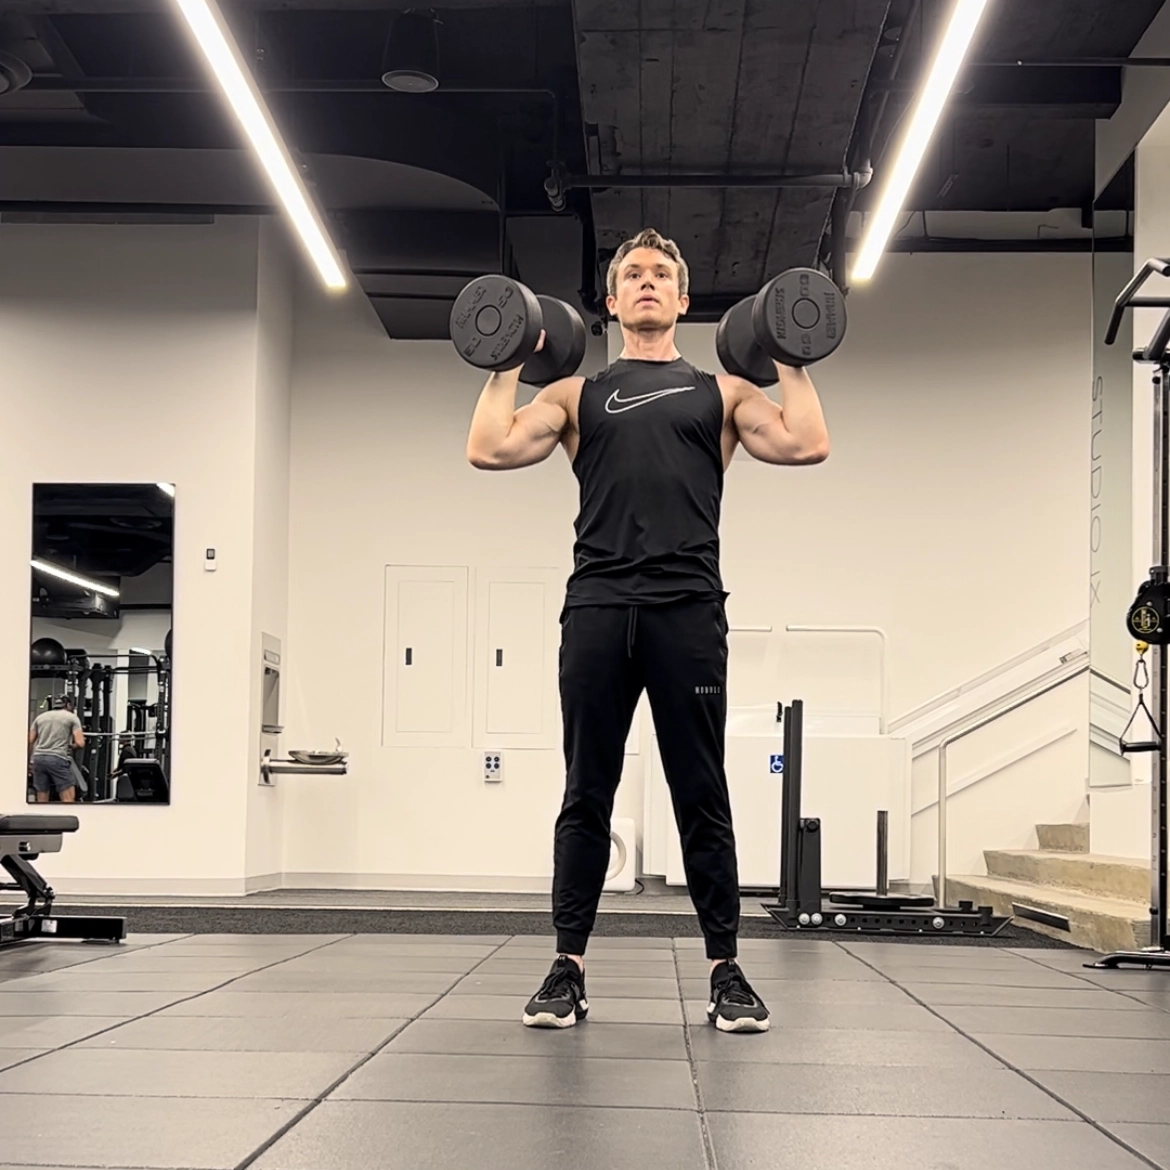 Cameron McCune does a dumbbell exercise at a workout facility. He wears black athletic pants, a black sleeveless shirt and black sneakers. He stands with his feet shoulder-width apart, bends his arms so that his hands are just above his shoulders, and holds a dumbbell in each hand.